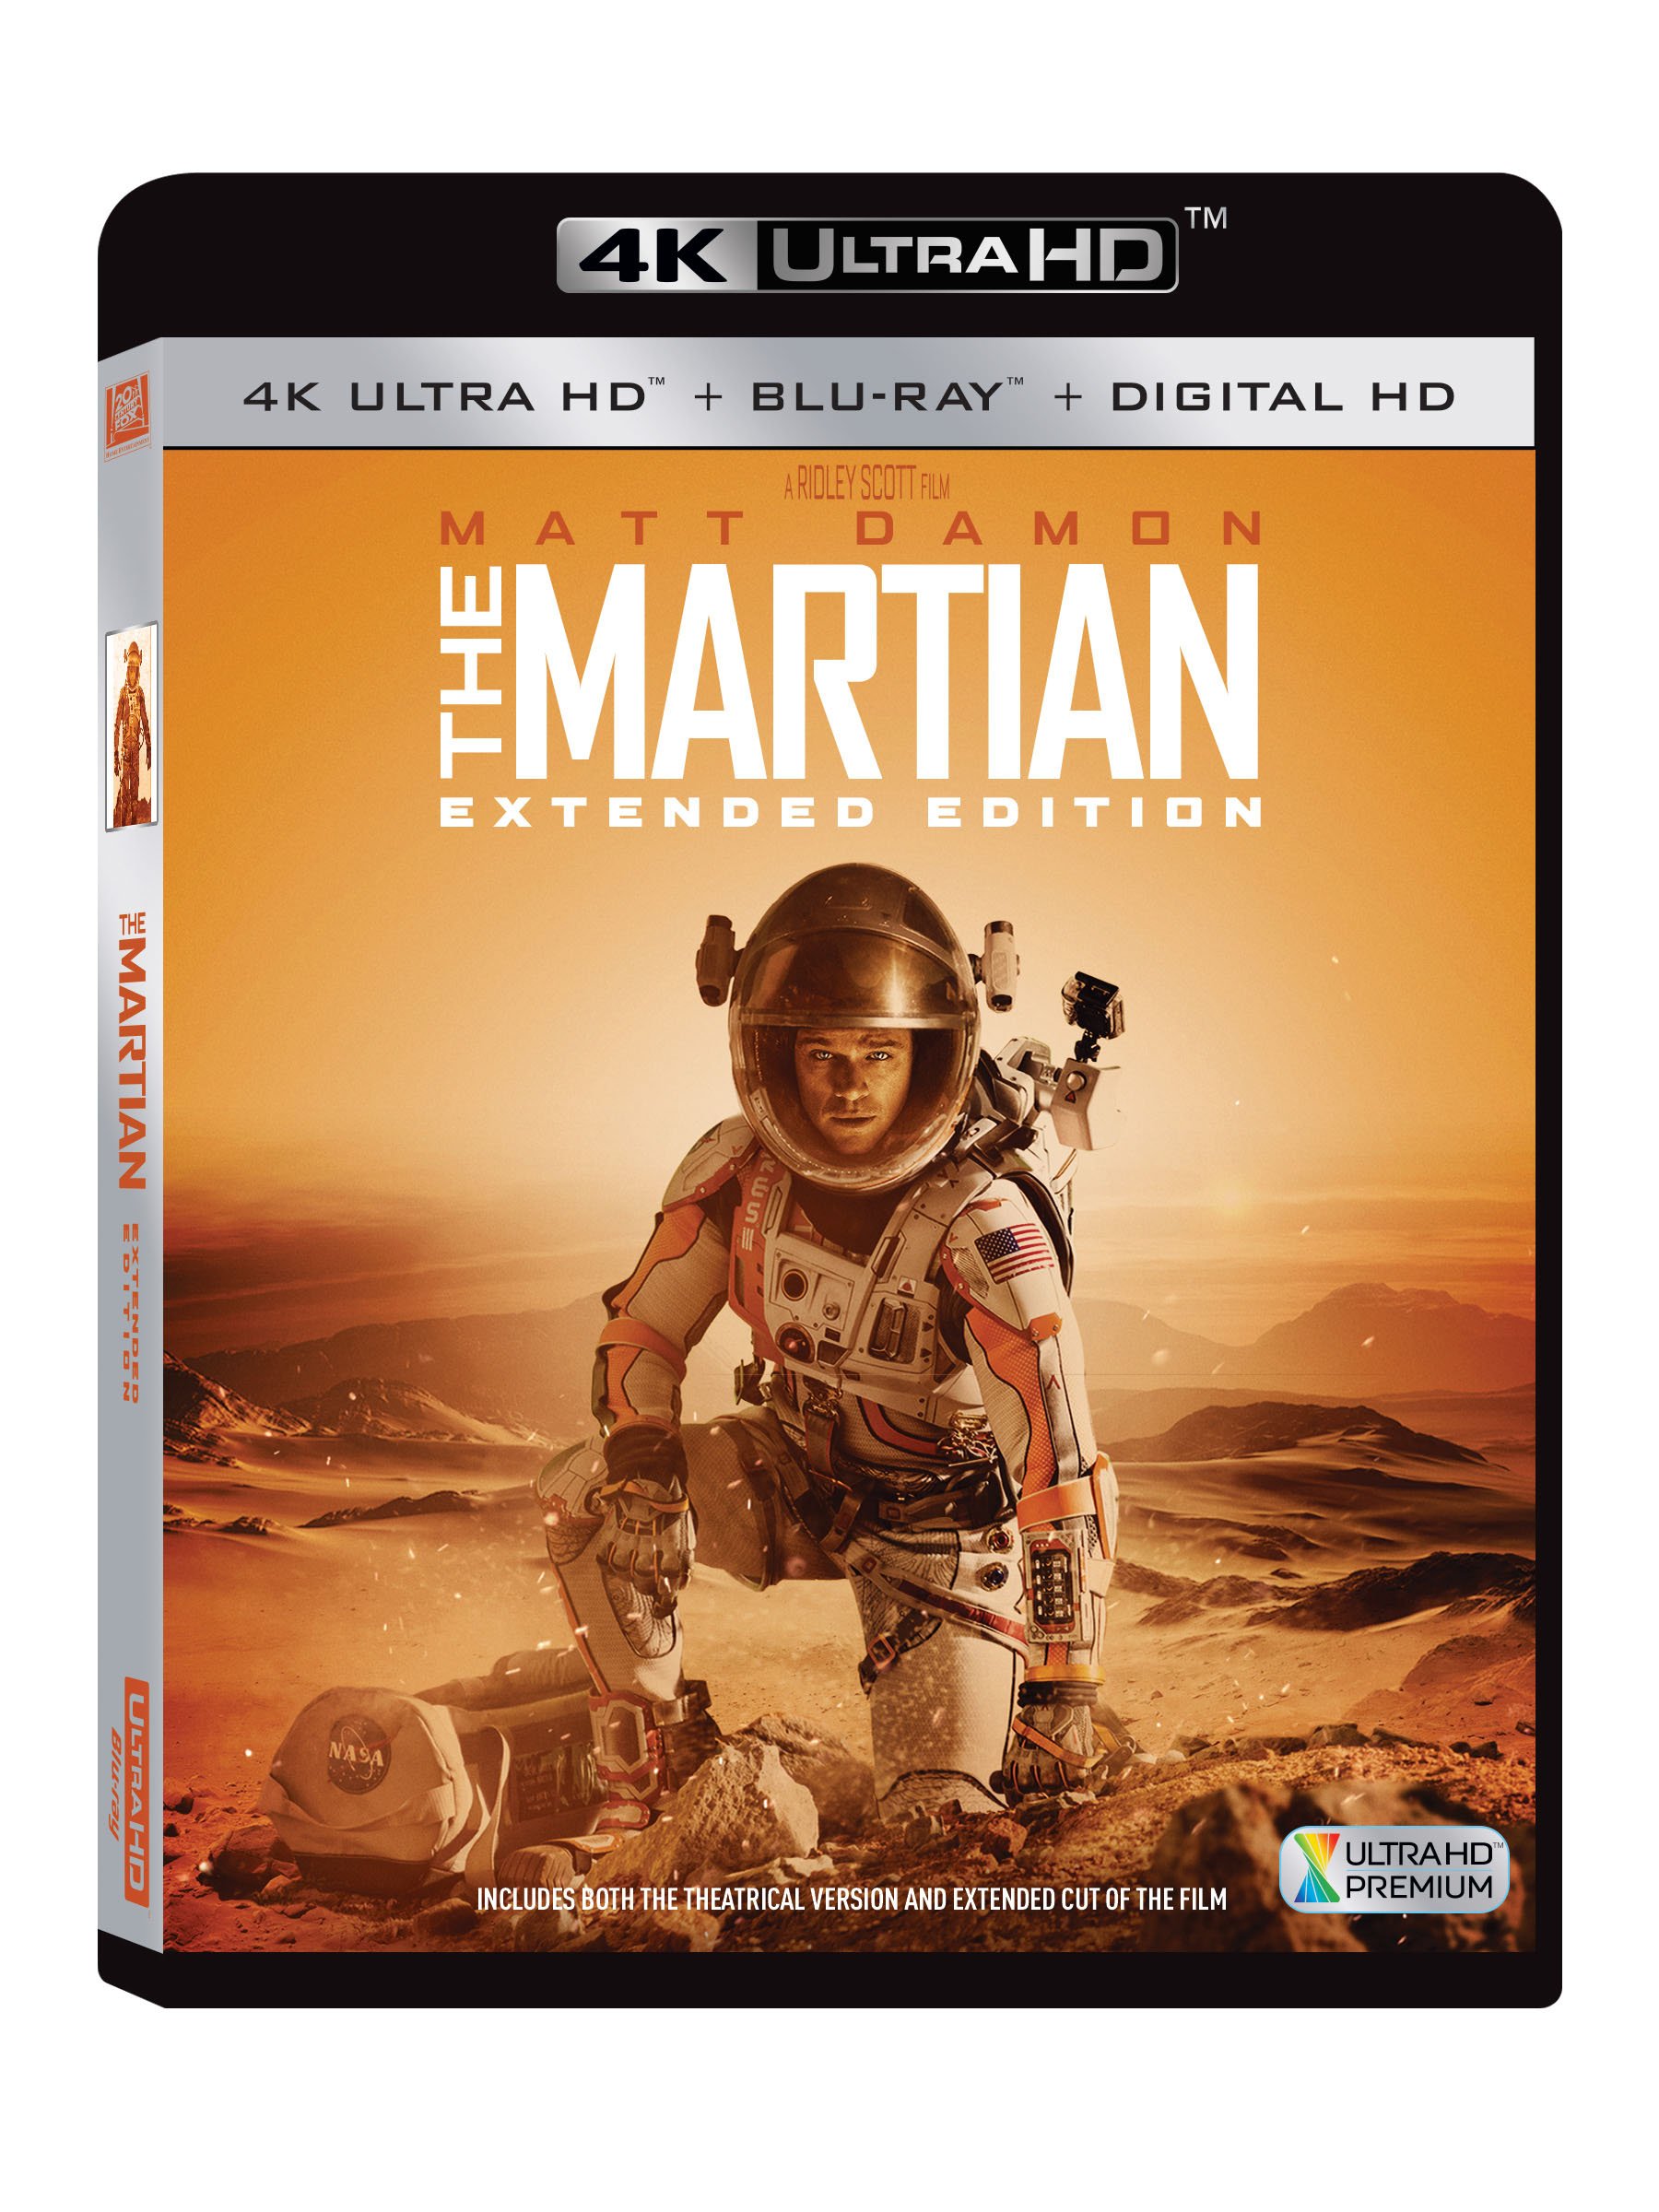 the-martian-extended-edition-4k-uhd-hd-3-disc-movie-purchase-or